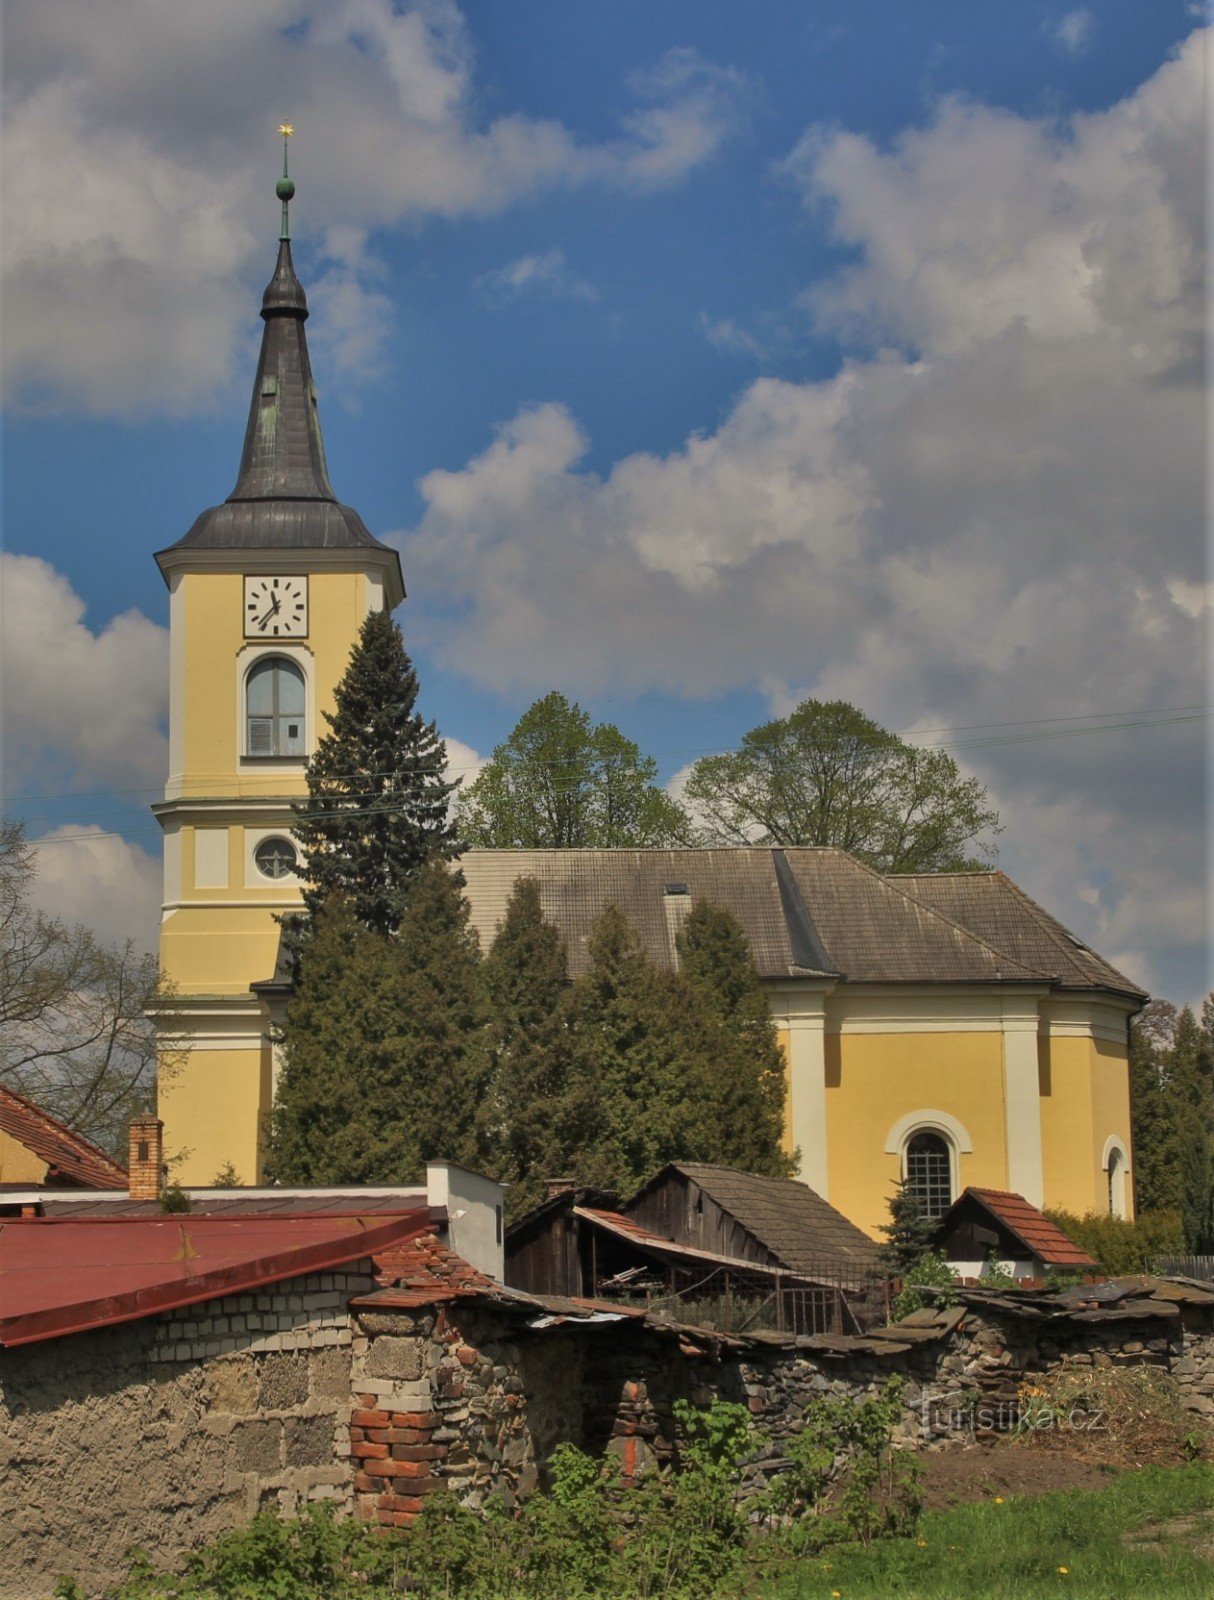 General view of the Evangelical church from the marketplace